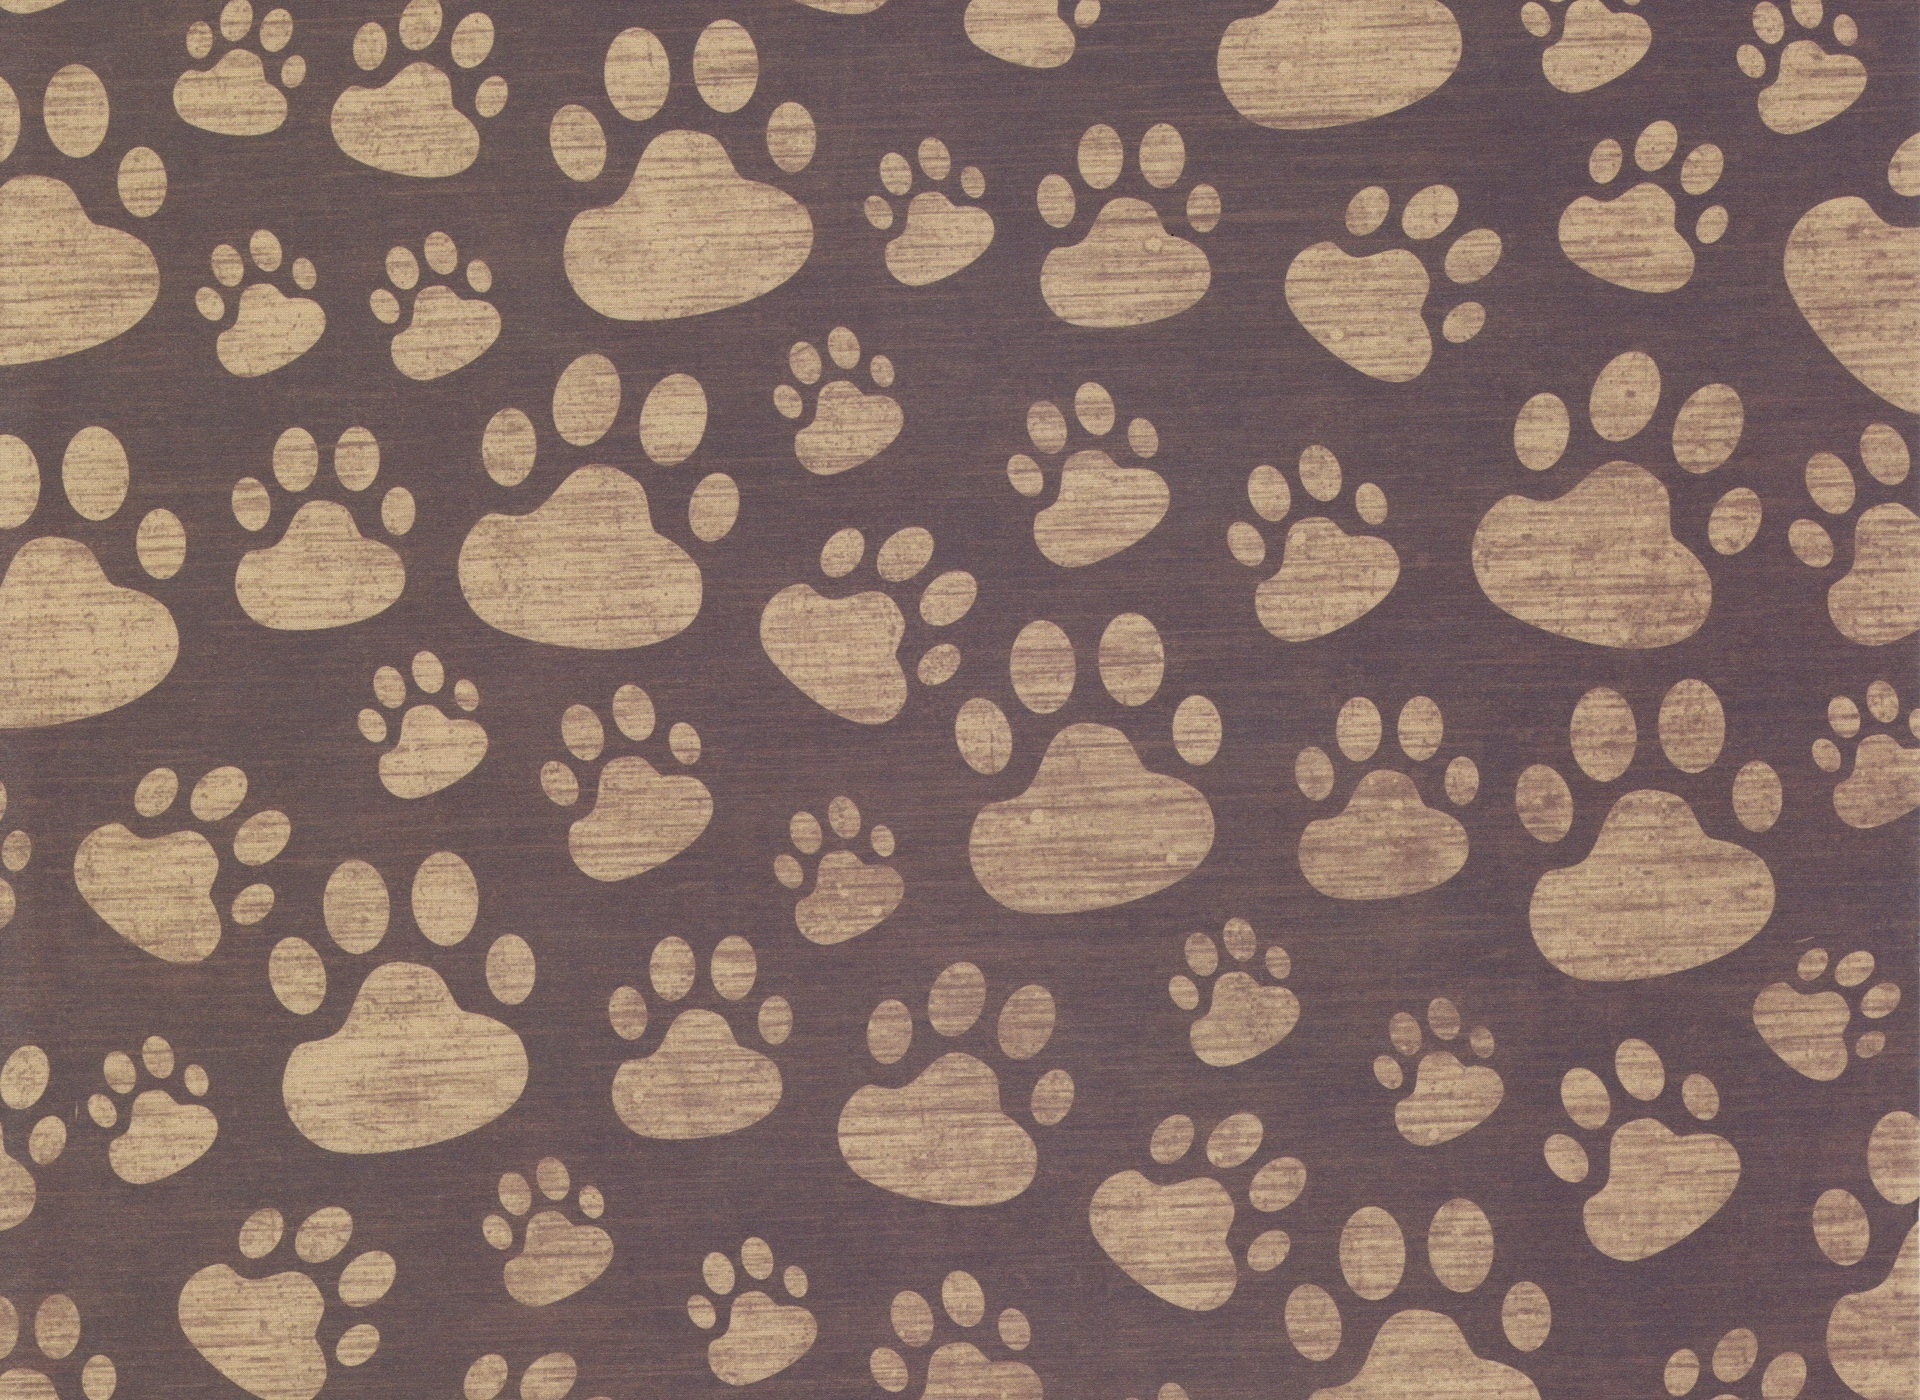 111757 Screensavers and Wallpapers Paws for phone. Download texture, textures, surface, traces, paws pictures for free